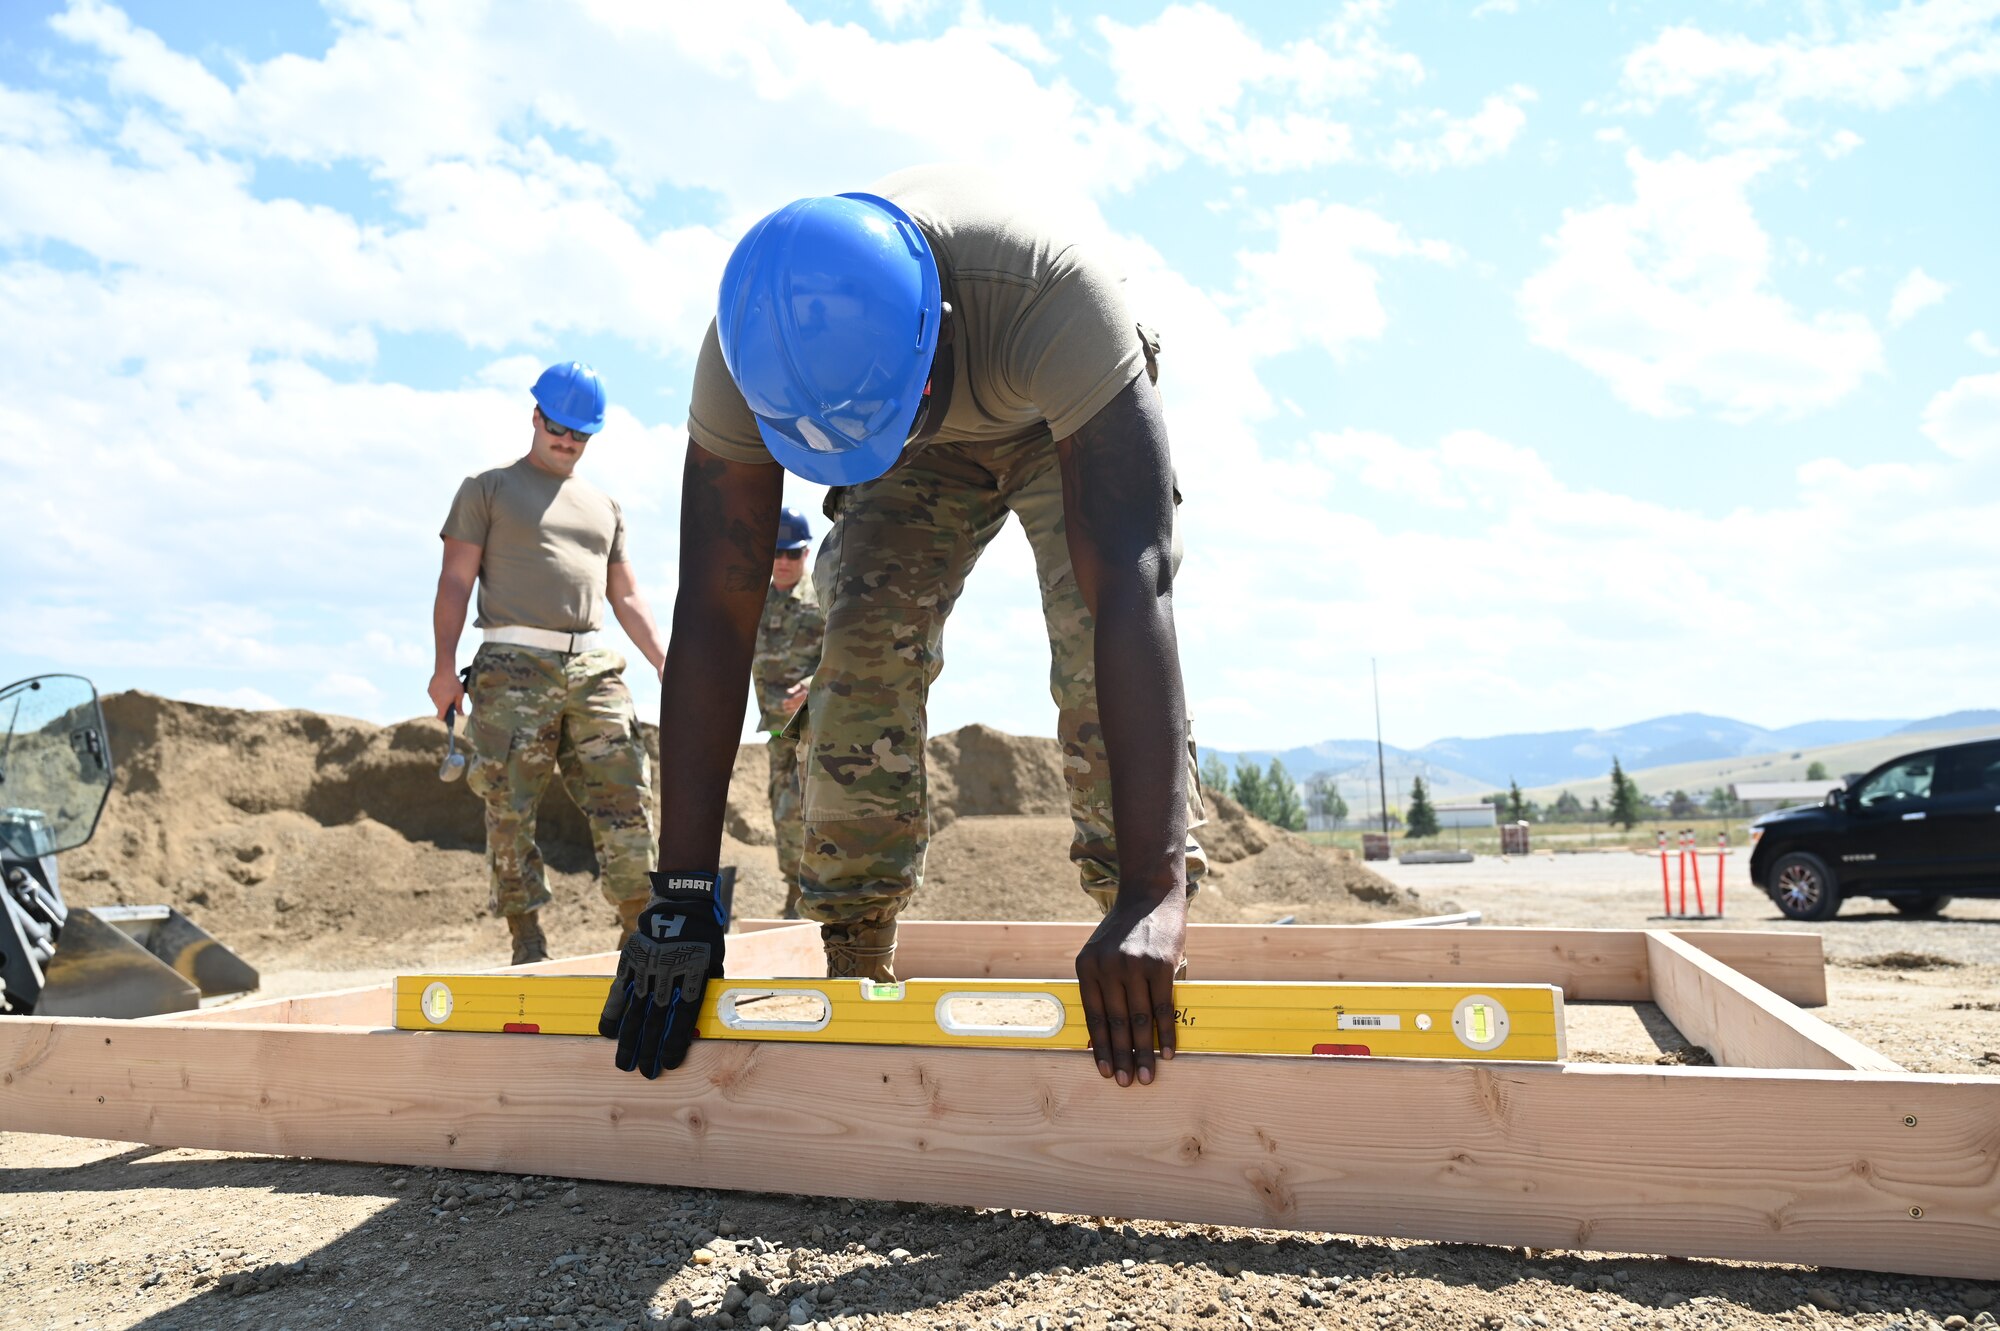 Senior Airman Jonathan Edwards, 131st Civil Engineer Squadron heavy equipment operator, ensures the level is correct for a concrete pad at Fort William Henry Harrison, Montana, July 25, 2023. The 131st, 819th Red Horse Squadron, and 219th Red Horse Squadron helped provide the Montana National Guard with a M1 Abrams tank storage facility to save taxpayer dollars. (U.S. Air National Guard photo by Airman 1st Class Phoenix Lietch)